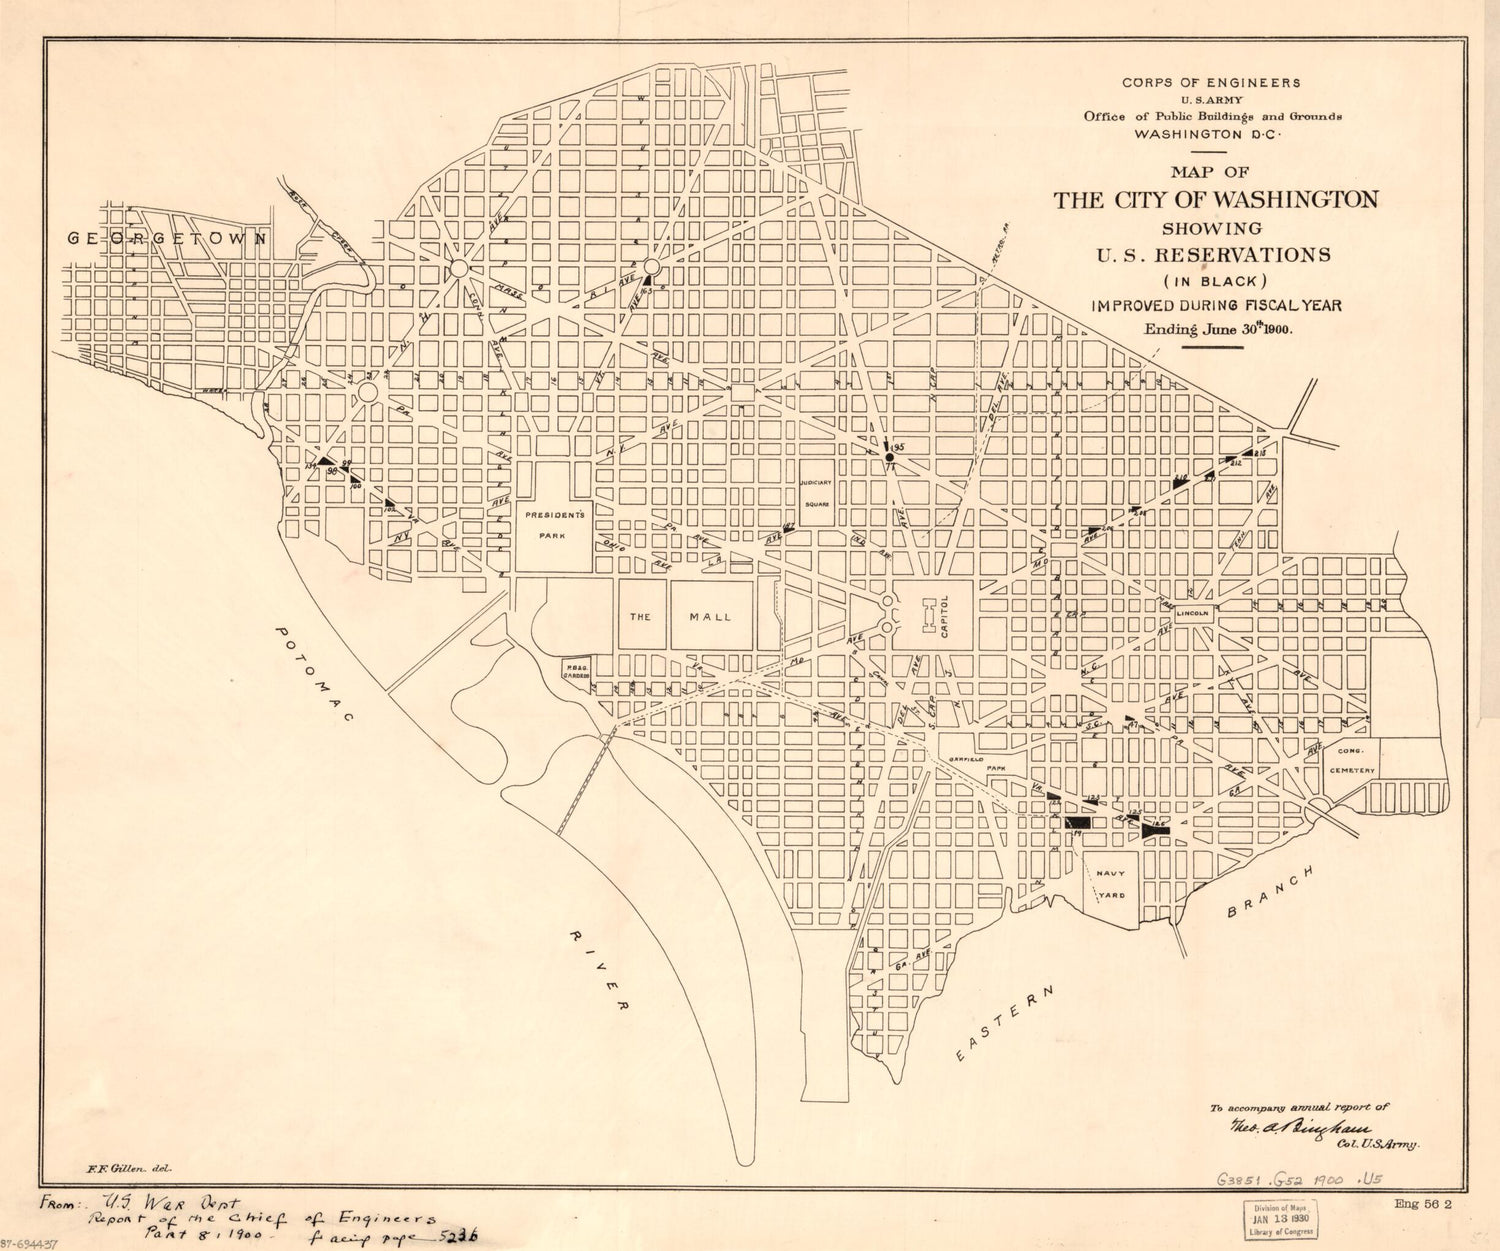 This old map of Map of the City of Washington Showing U.S. Reservations : (in Black) Improved During Fiscal Year Ending June 30th from 1900 was created by Theo. A. (Theodore Alfred) Bingham, F. F. Gillen,  United States. Office of Public Buildings and Gr